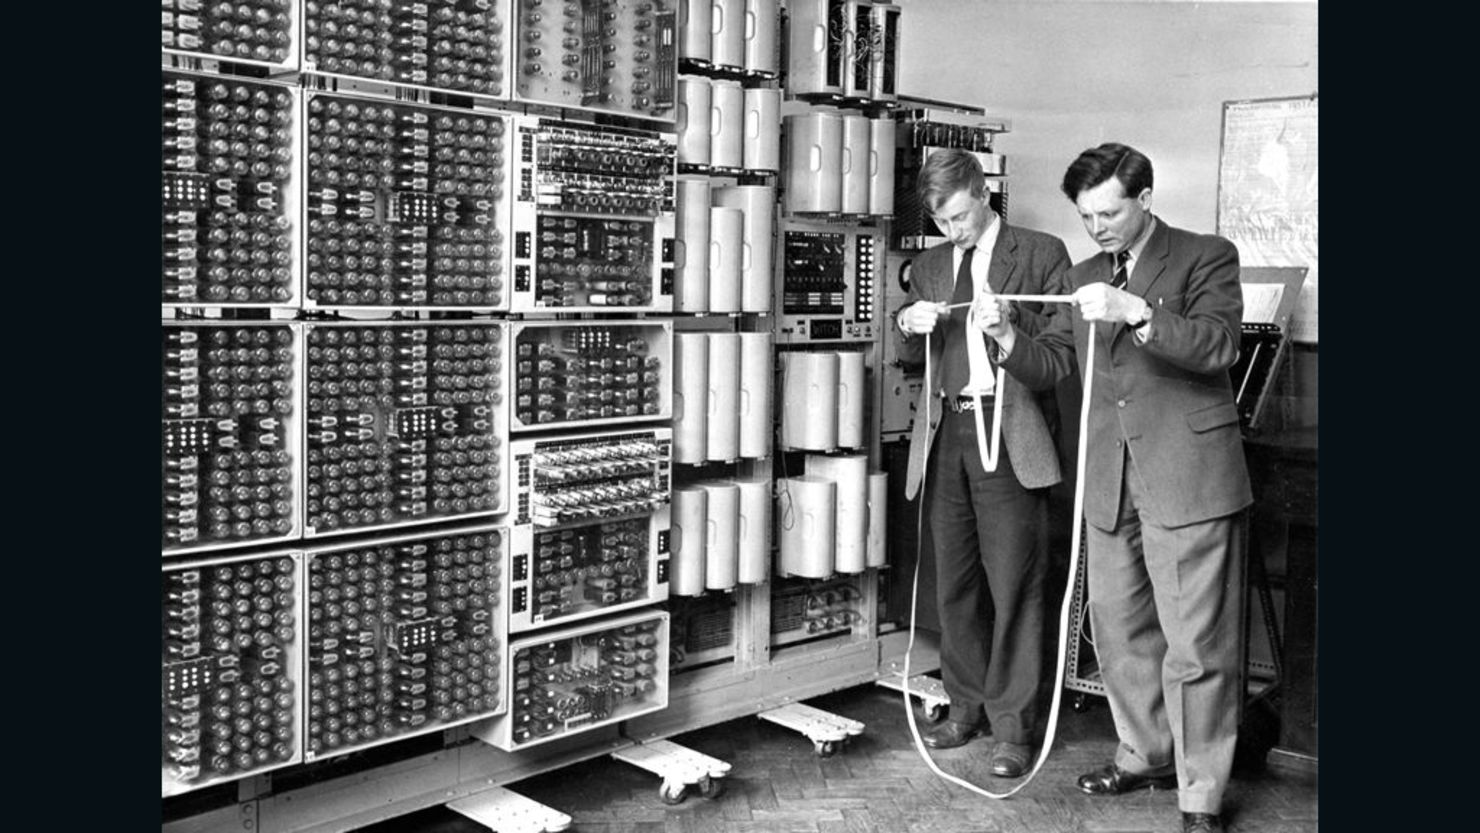 The WITCH computer, first used in the 1950s, reads programs that are punched into strips of tape.